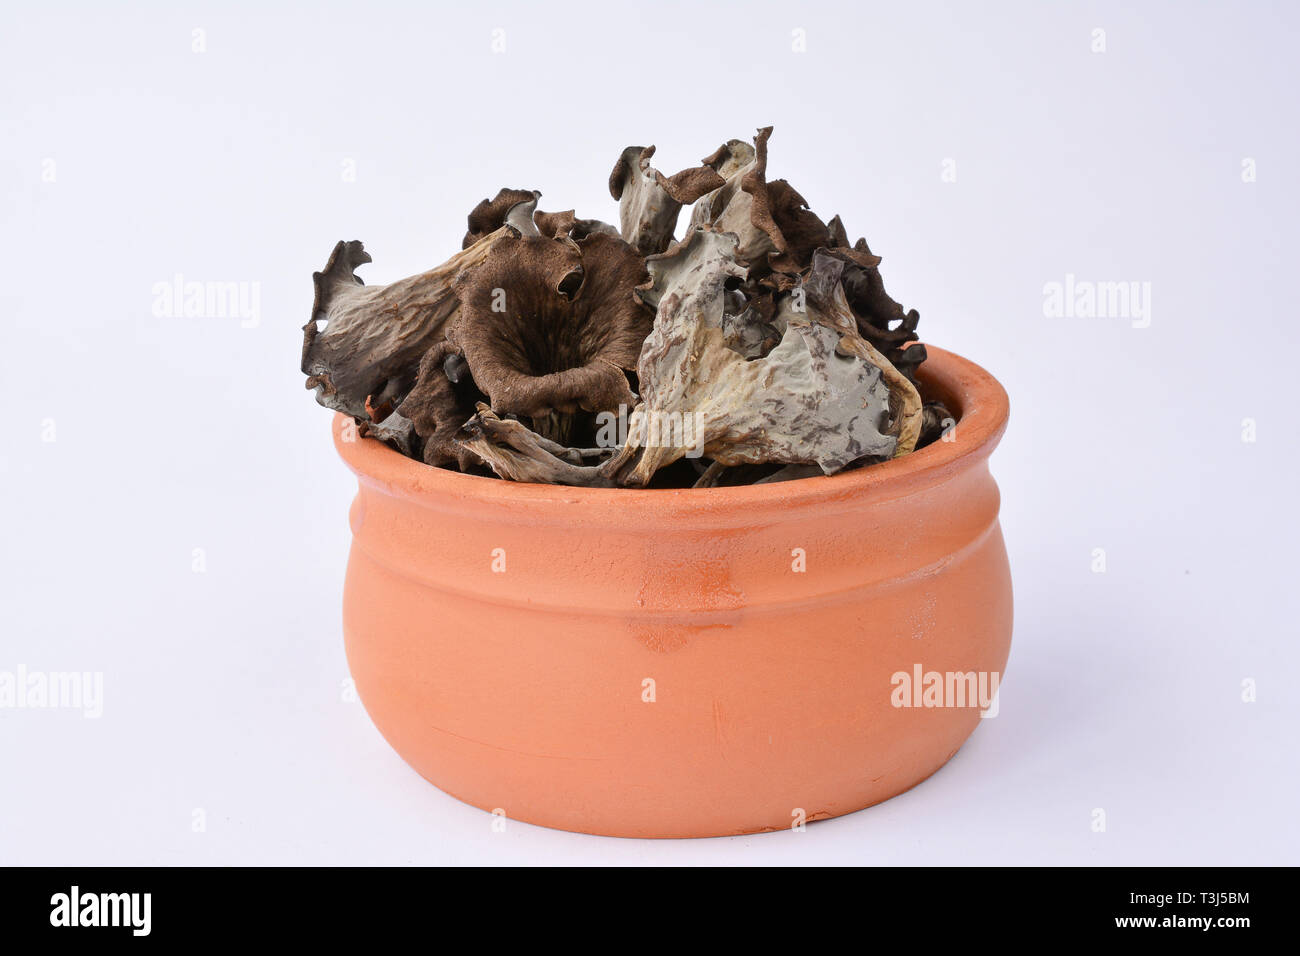 Dried edible Horn of Plenty musfrooms or Craterellus cornucopioides, over white Stock Photo